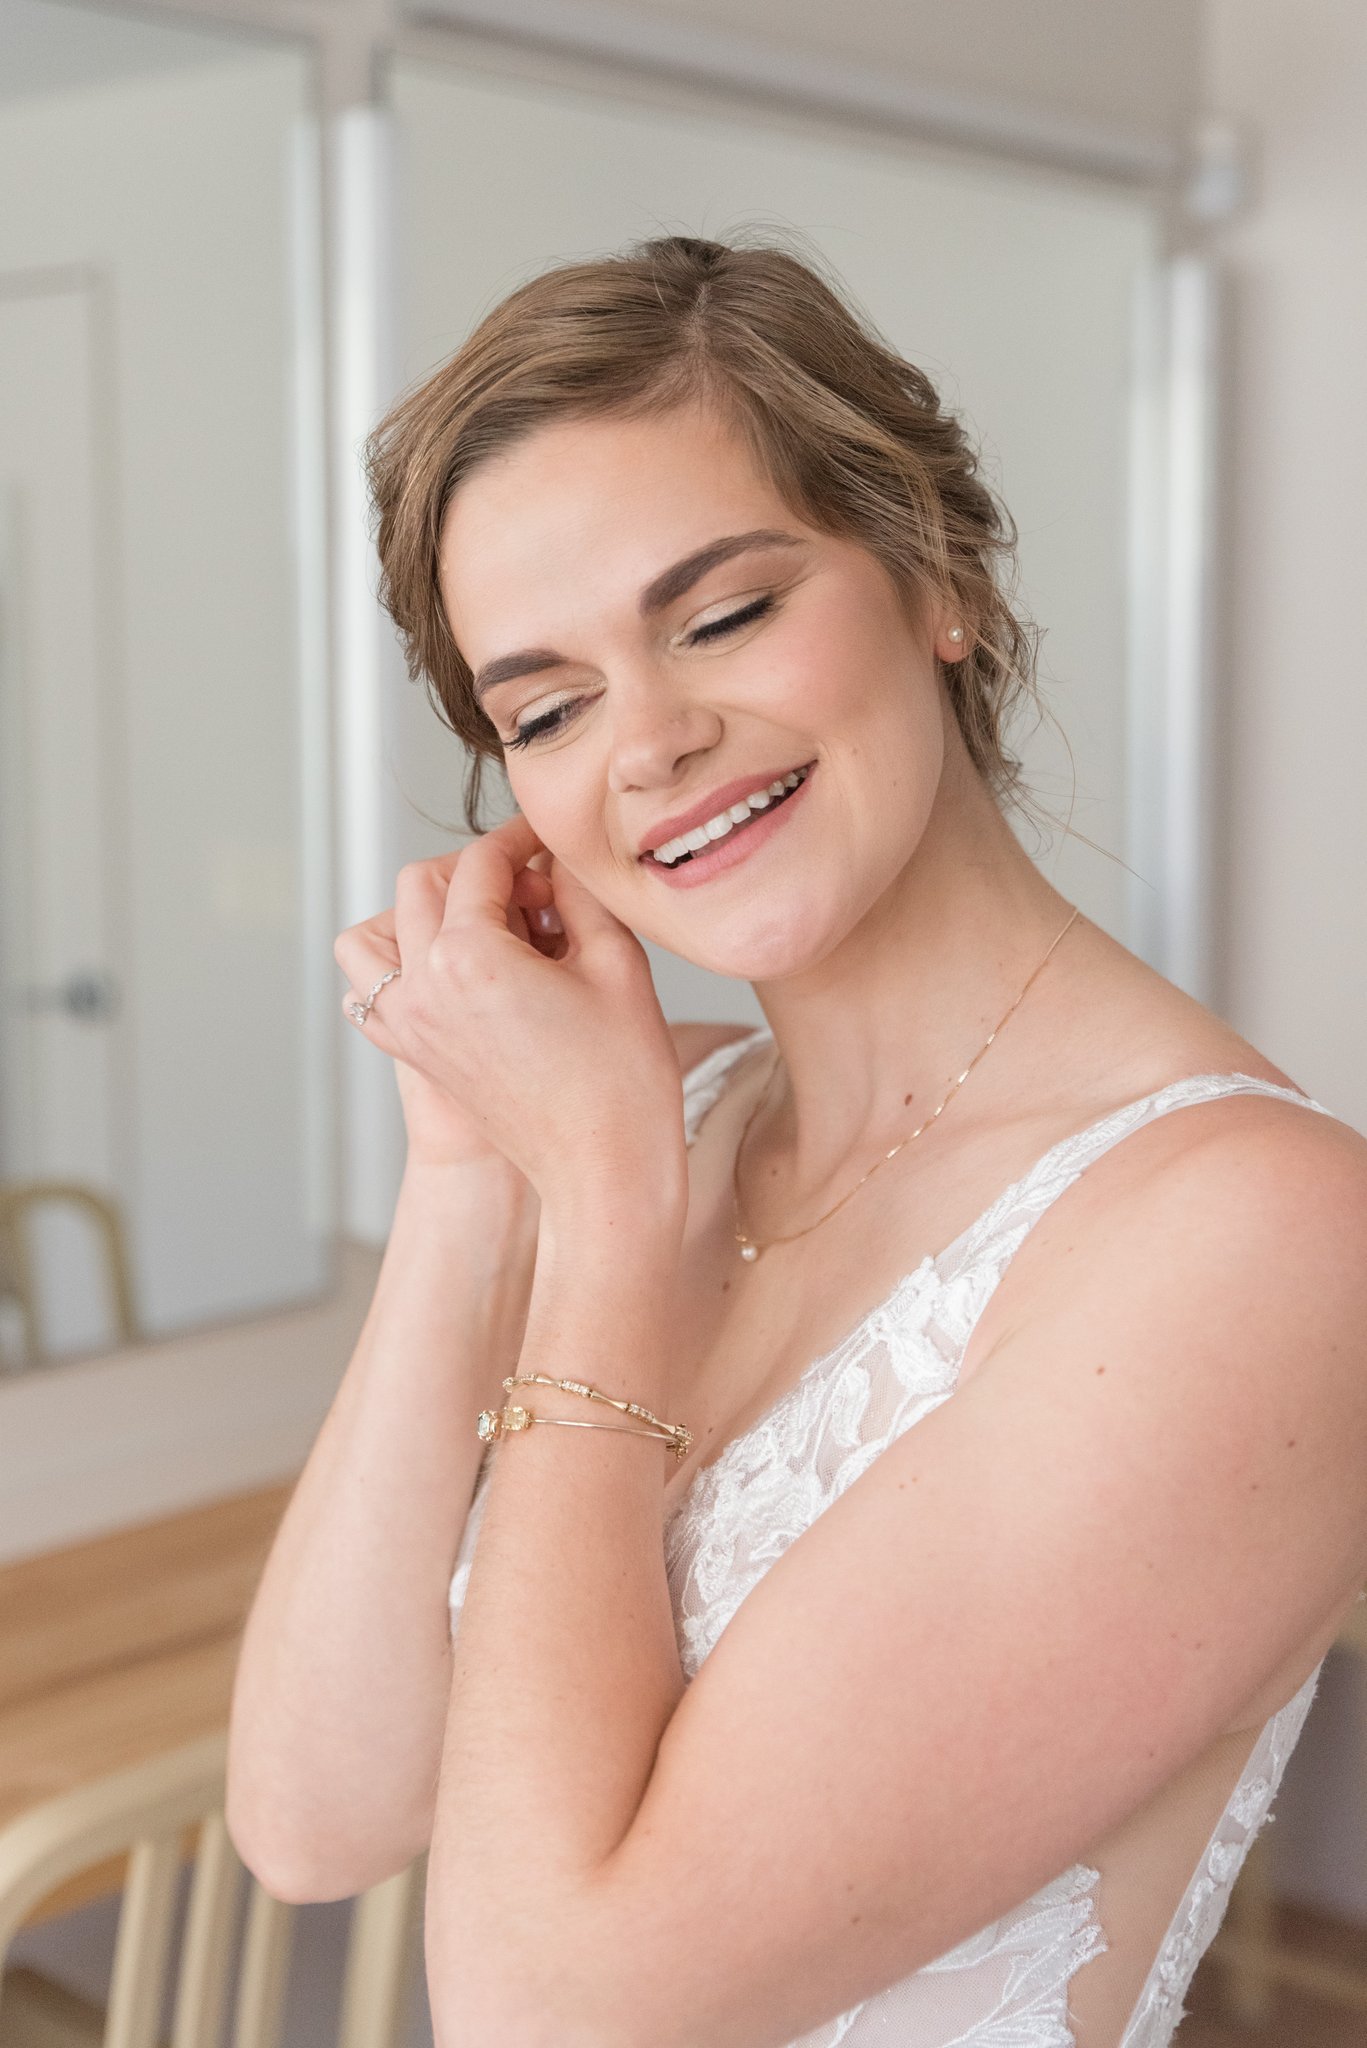 Bride putting on earrings| updo| bridal makeup| bridal pictures | Heather Marie Leicy.jpg